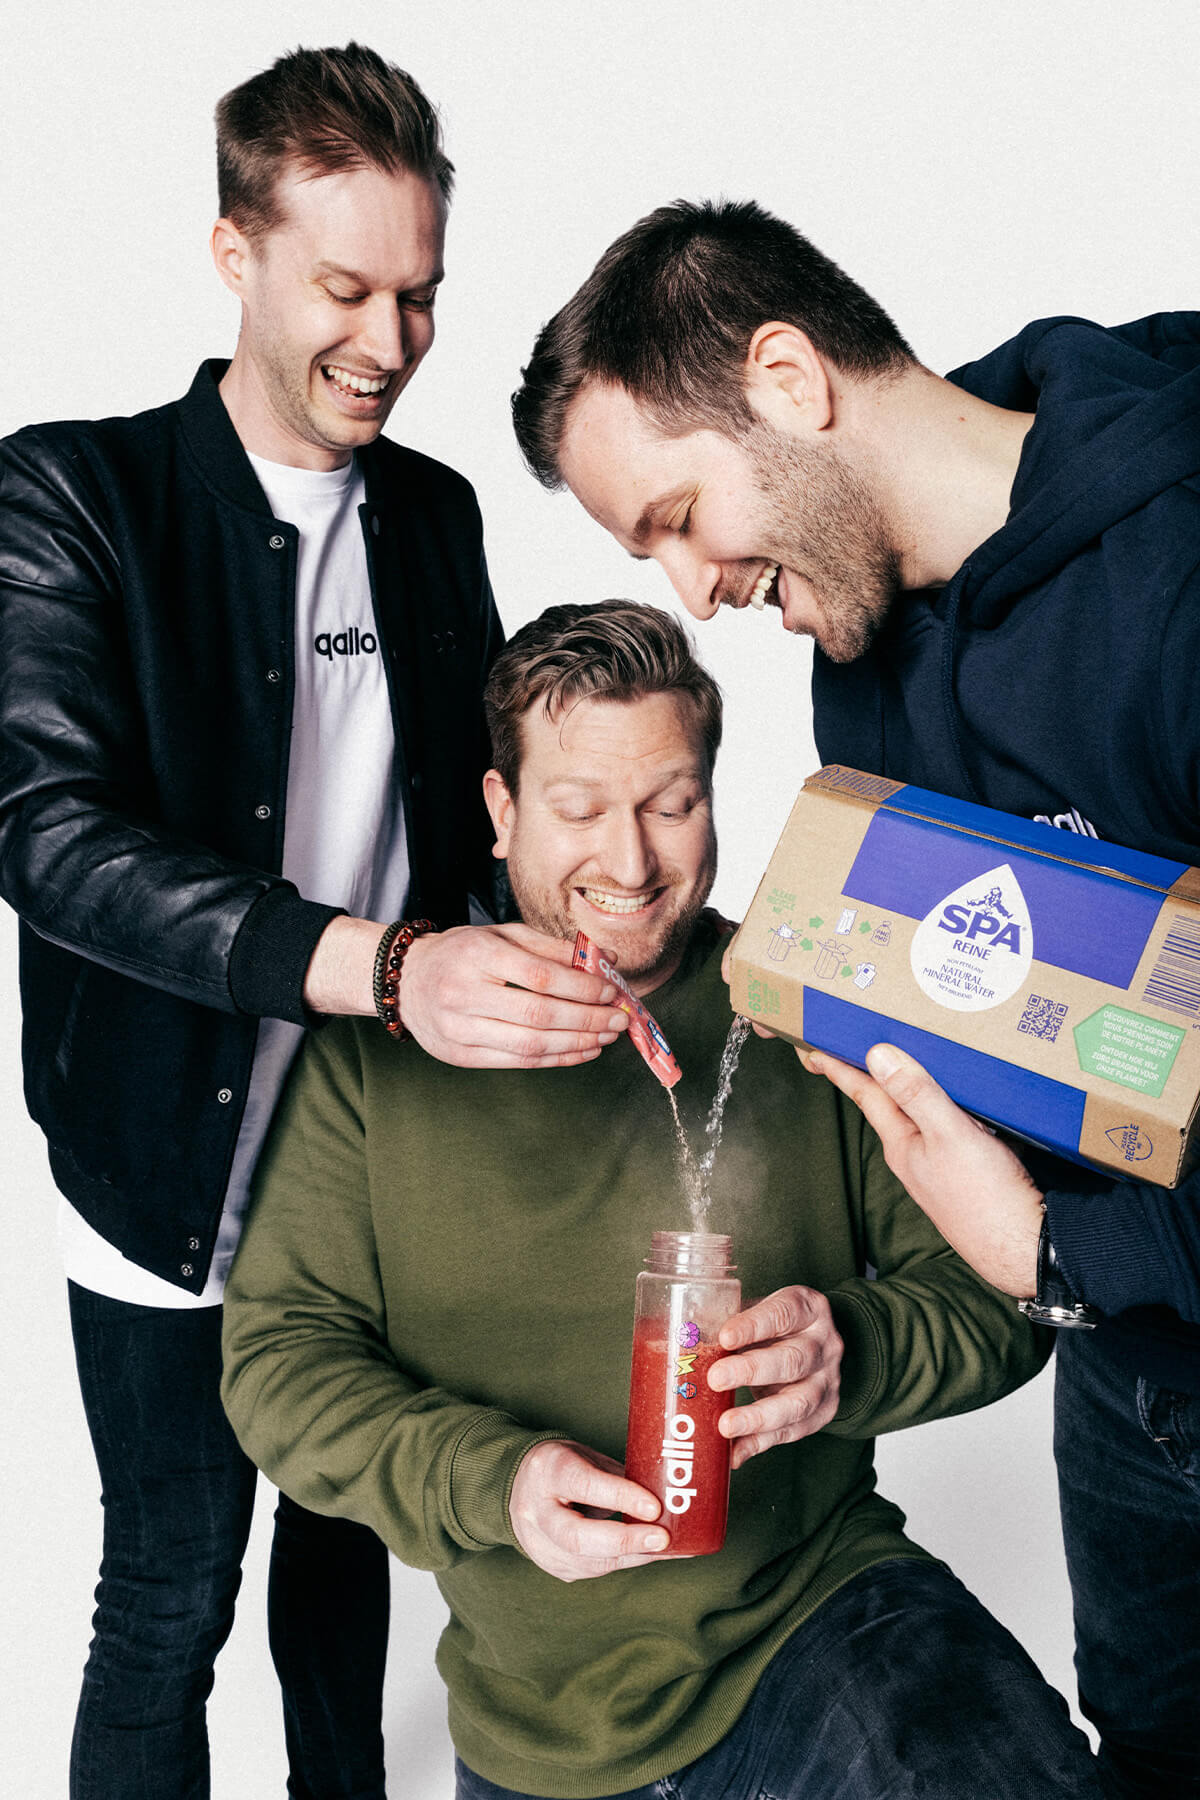 The Qallo founders - Niels Peetermans, Moos Tits,  Alexander Van Laer - making a Qallo with a SPA® Reine Eco Pack.